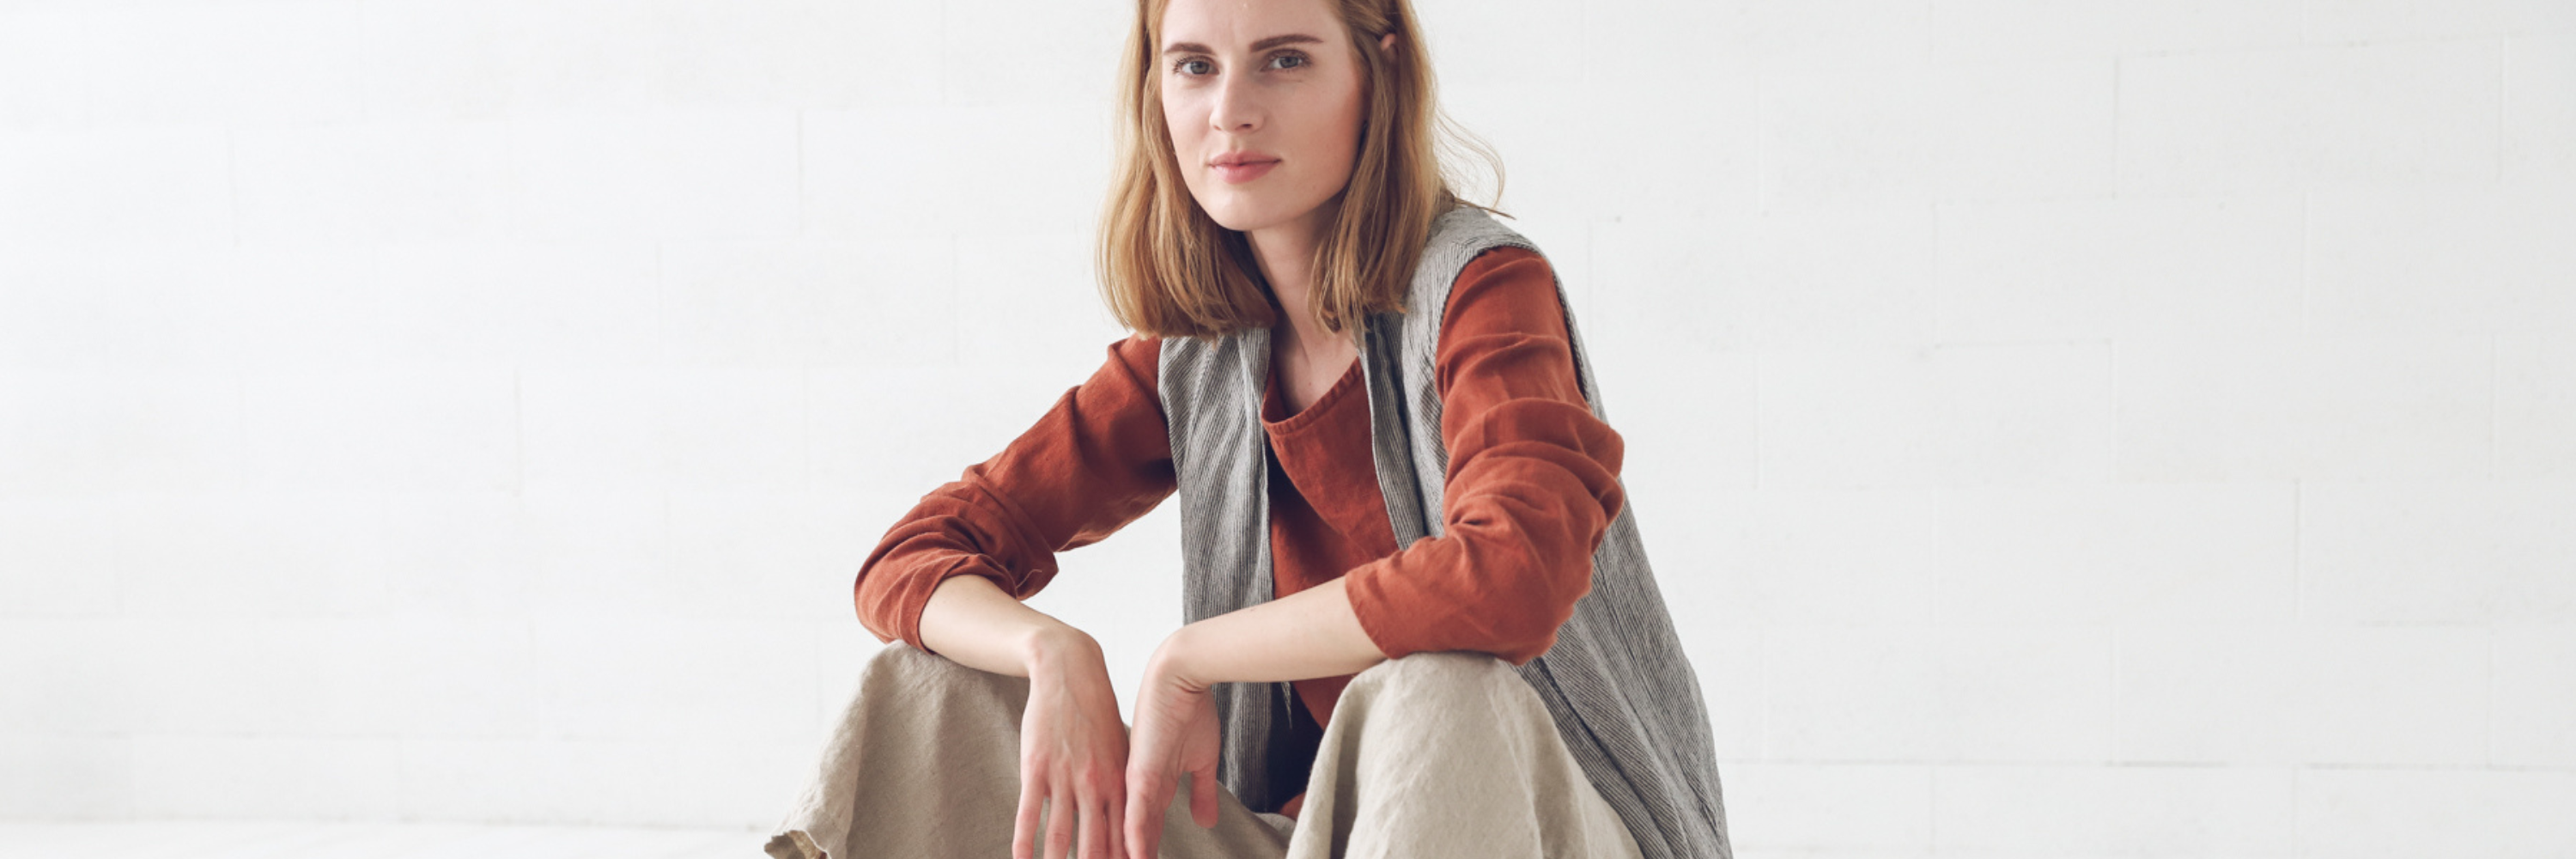 A woman sitting, wearing linen clothing.